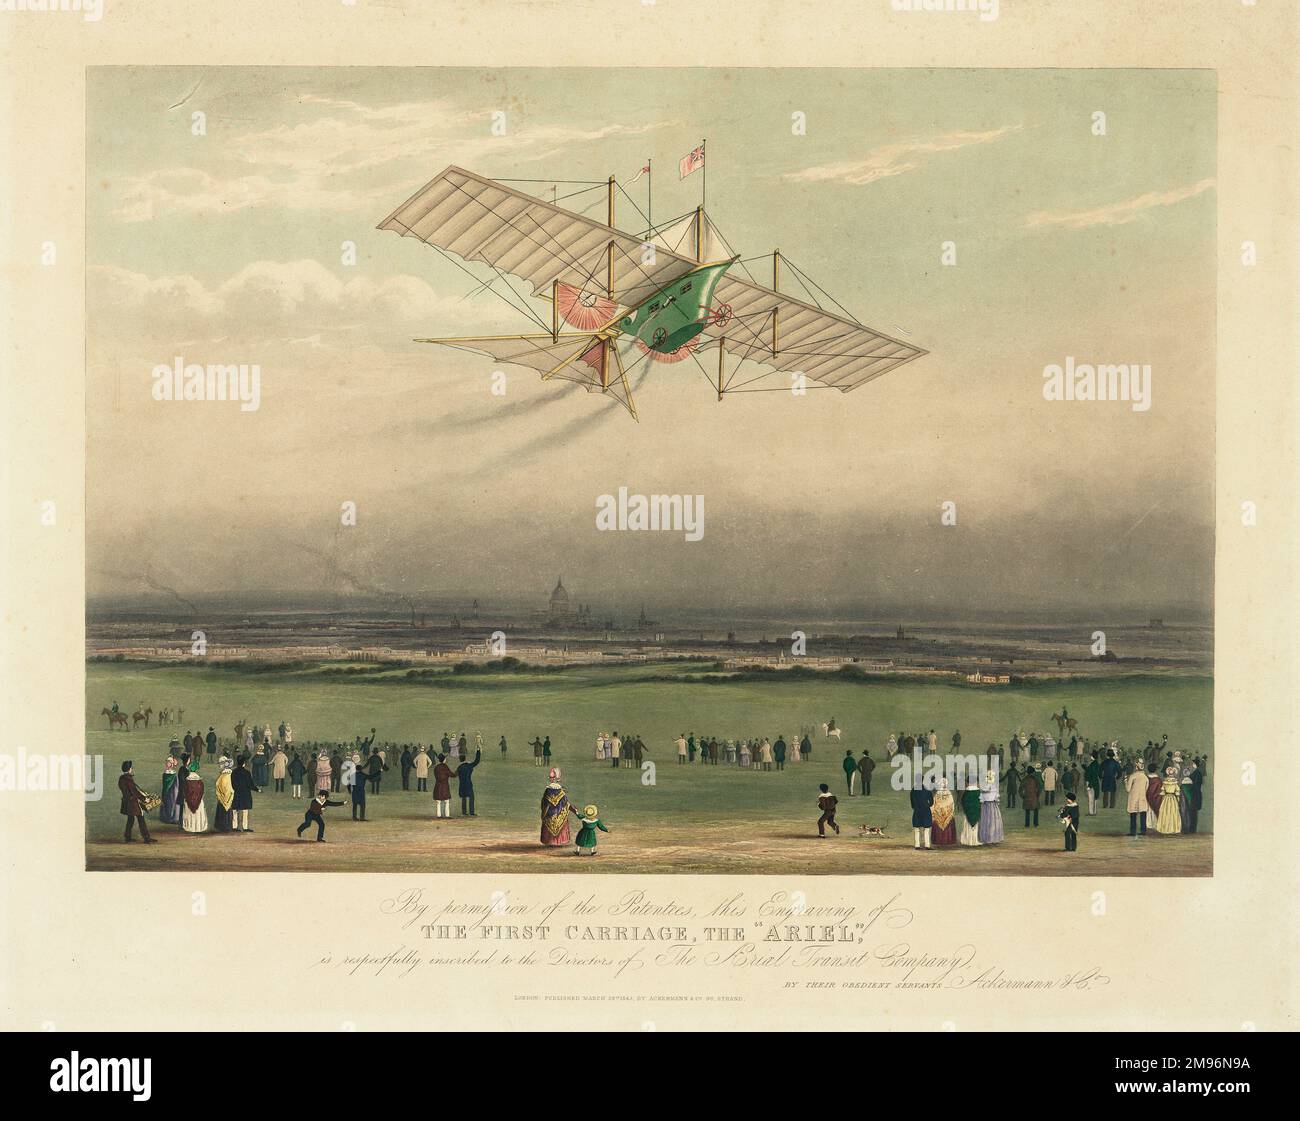 The Aerial Steam Carriage, or Ariel.  An artist's imaginary representation of a propeller-driven flying machine with wings. 'By Permission of  the Patentees, this Engraving of The First Carriage, The Aerial, is respectfully inscribed to the Directors of the Aerial Transit Company.'  It was patented by William Samuel Henson (1812-1888) and John Stringfellow (1799-1883) in 1842. Stock Photo